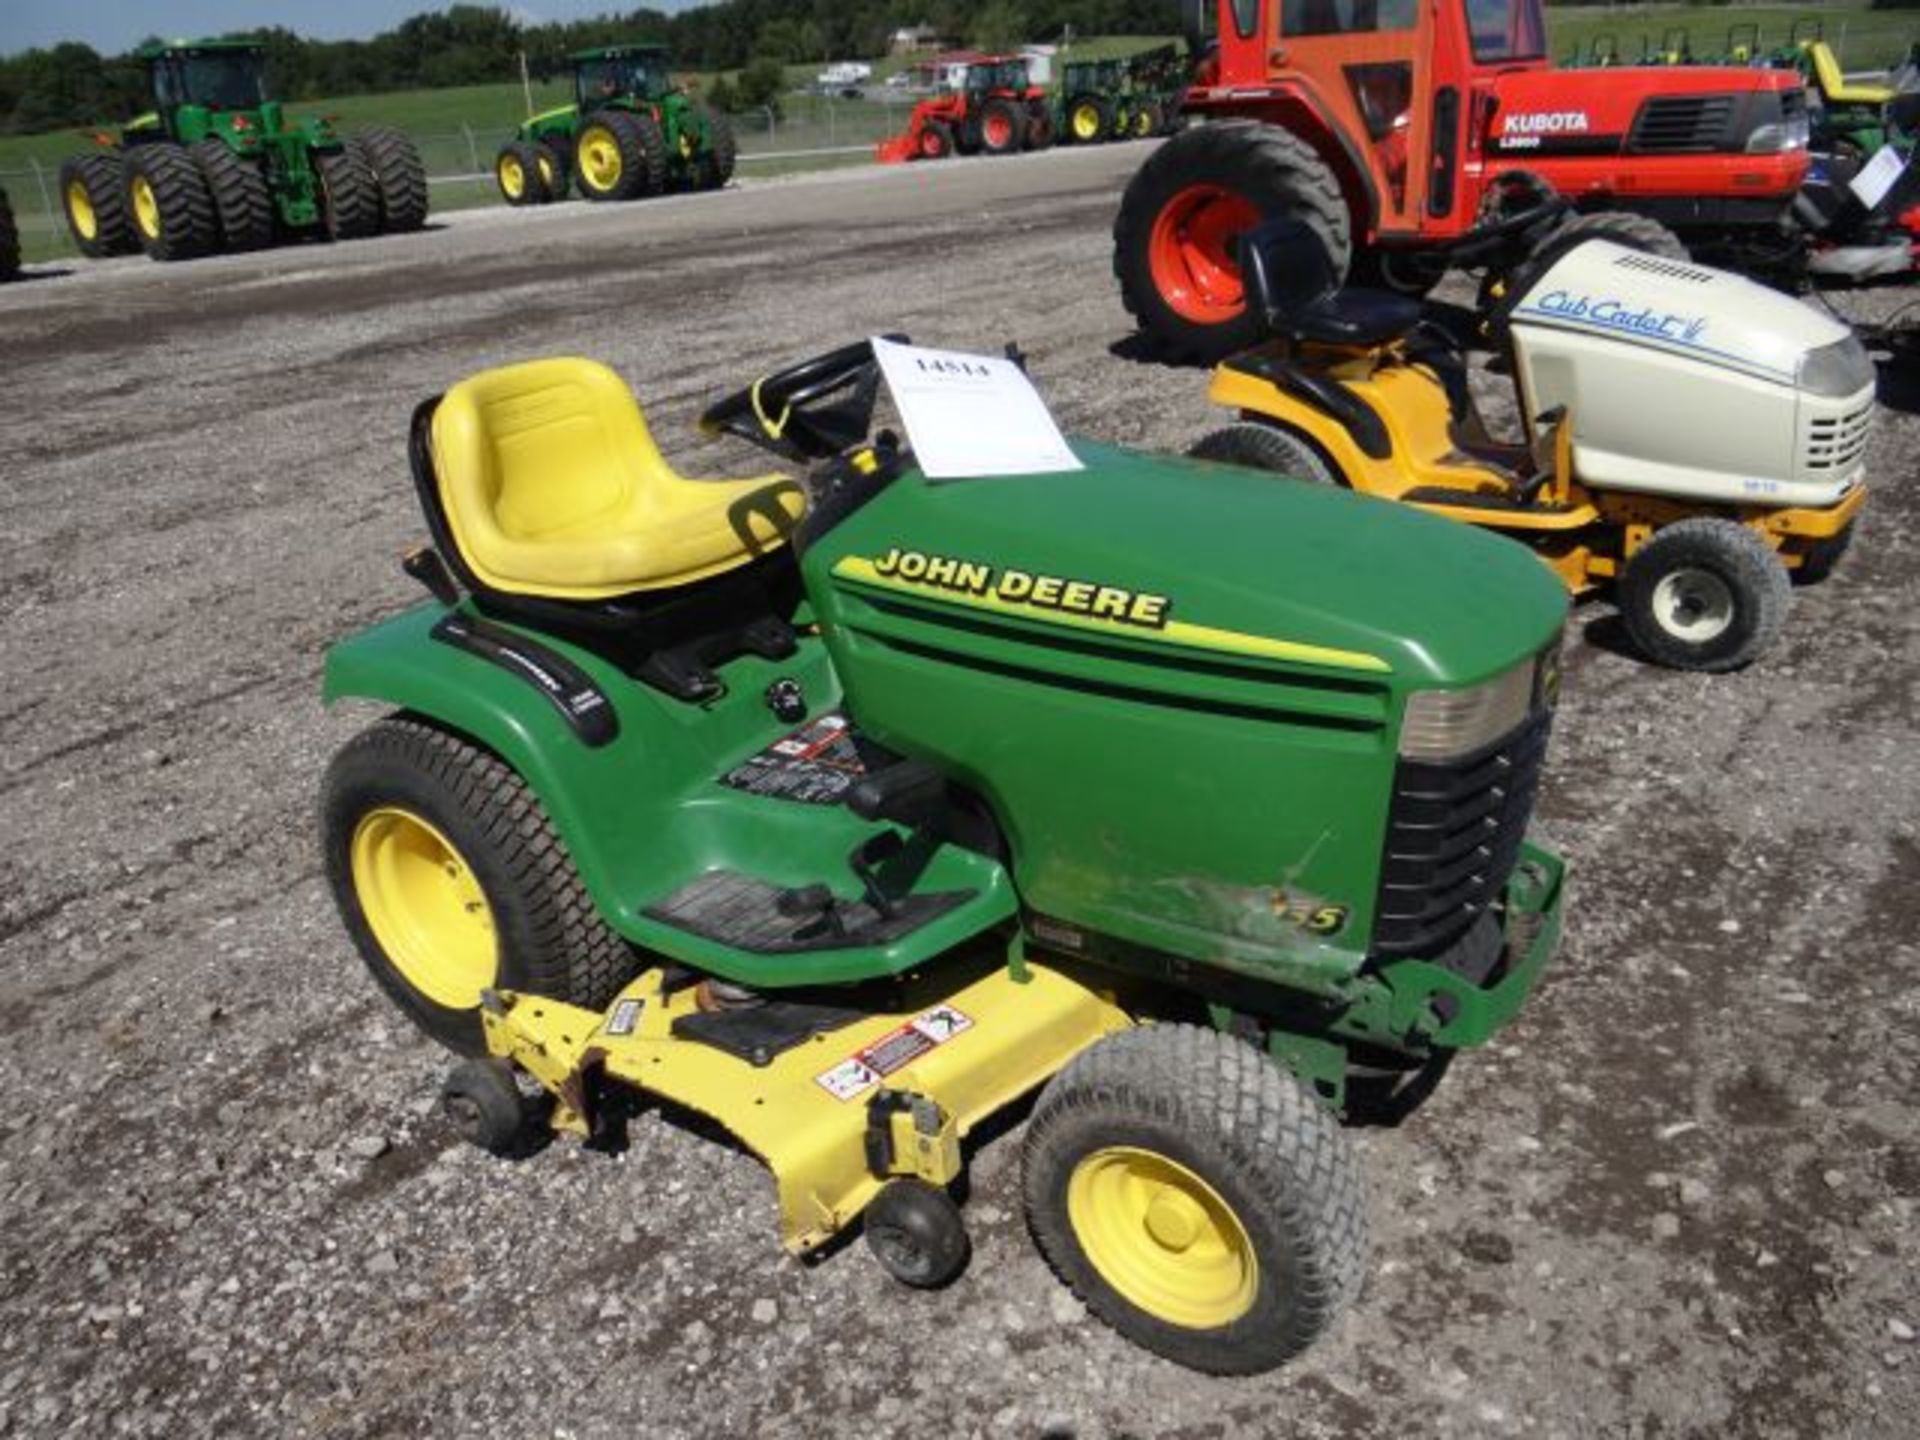 Lot 14514 - 1999 JD GT235/48 Mower No Meter, 18hp, V-Twin, Air Cooled, Hydro, 48" Deck,